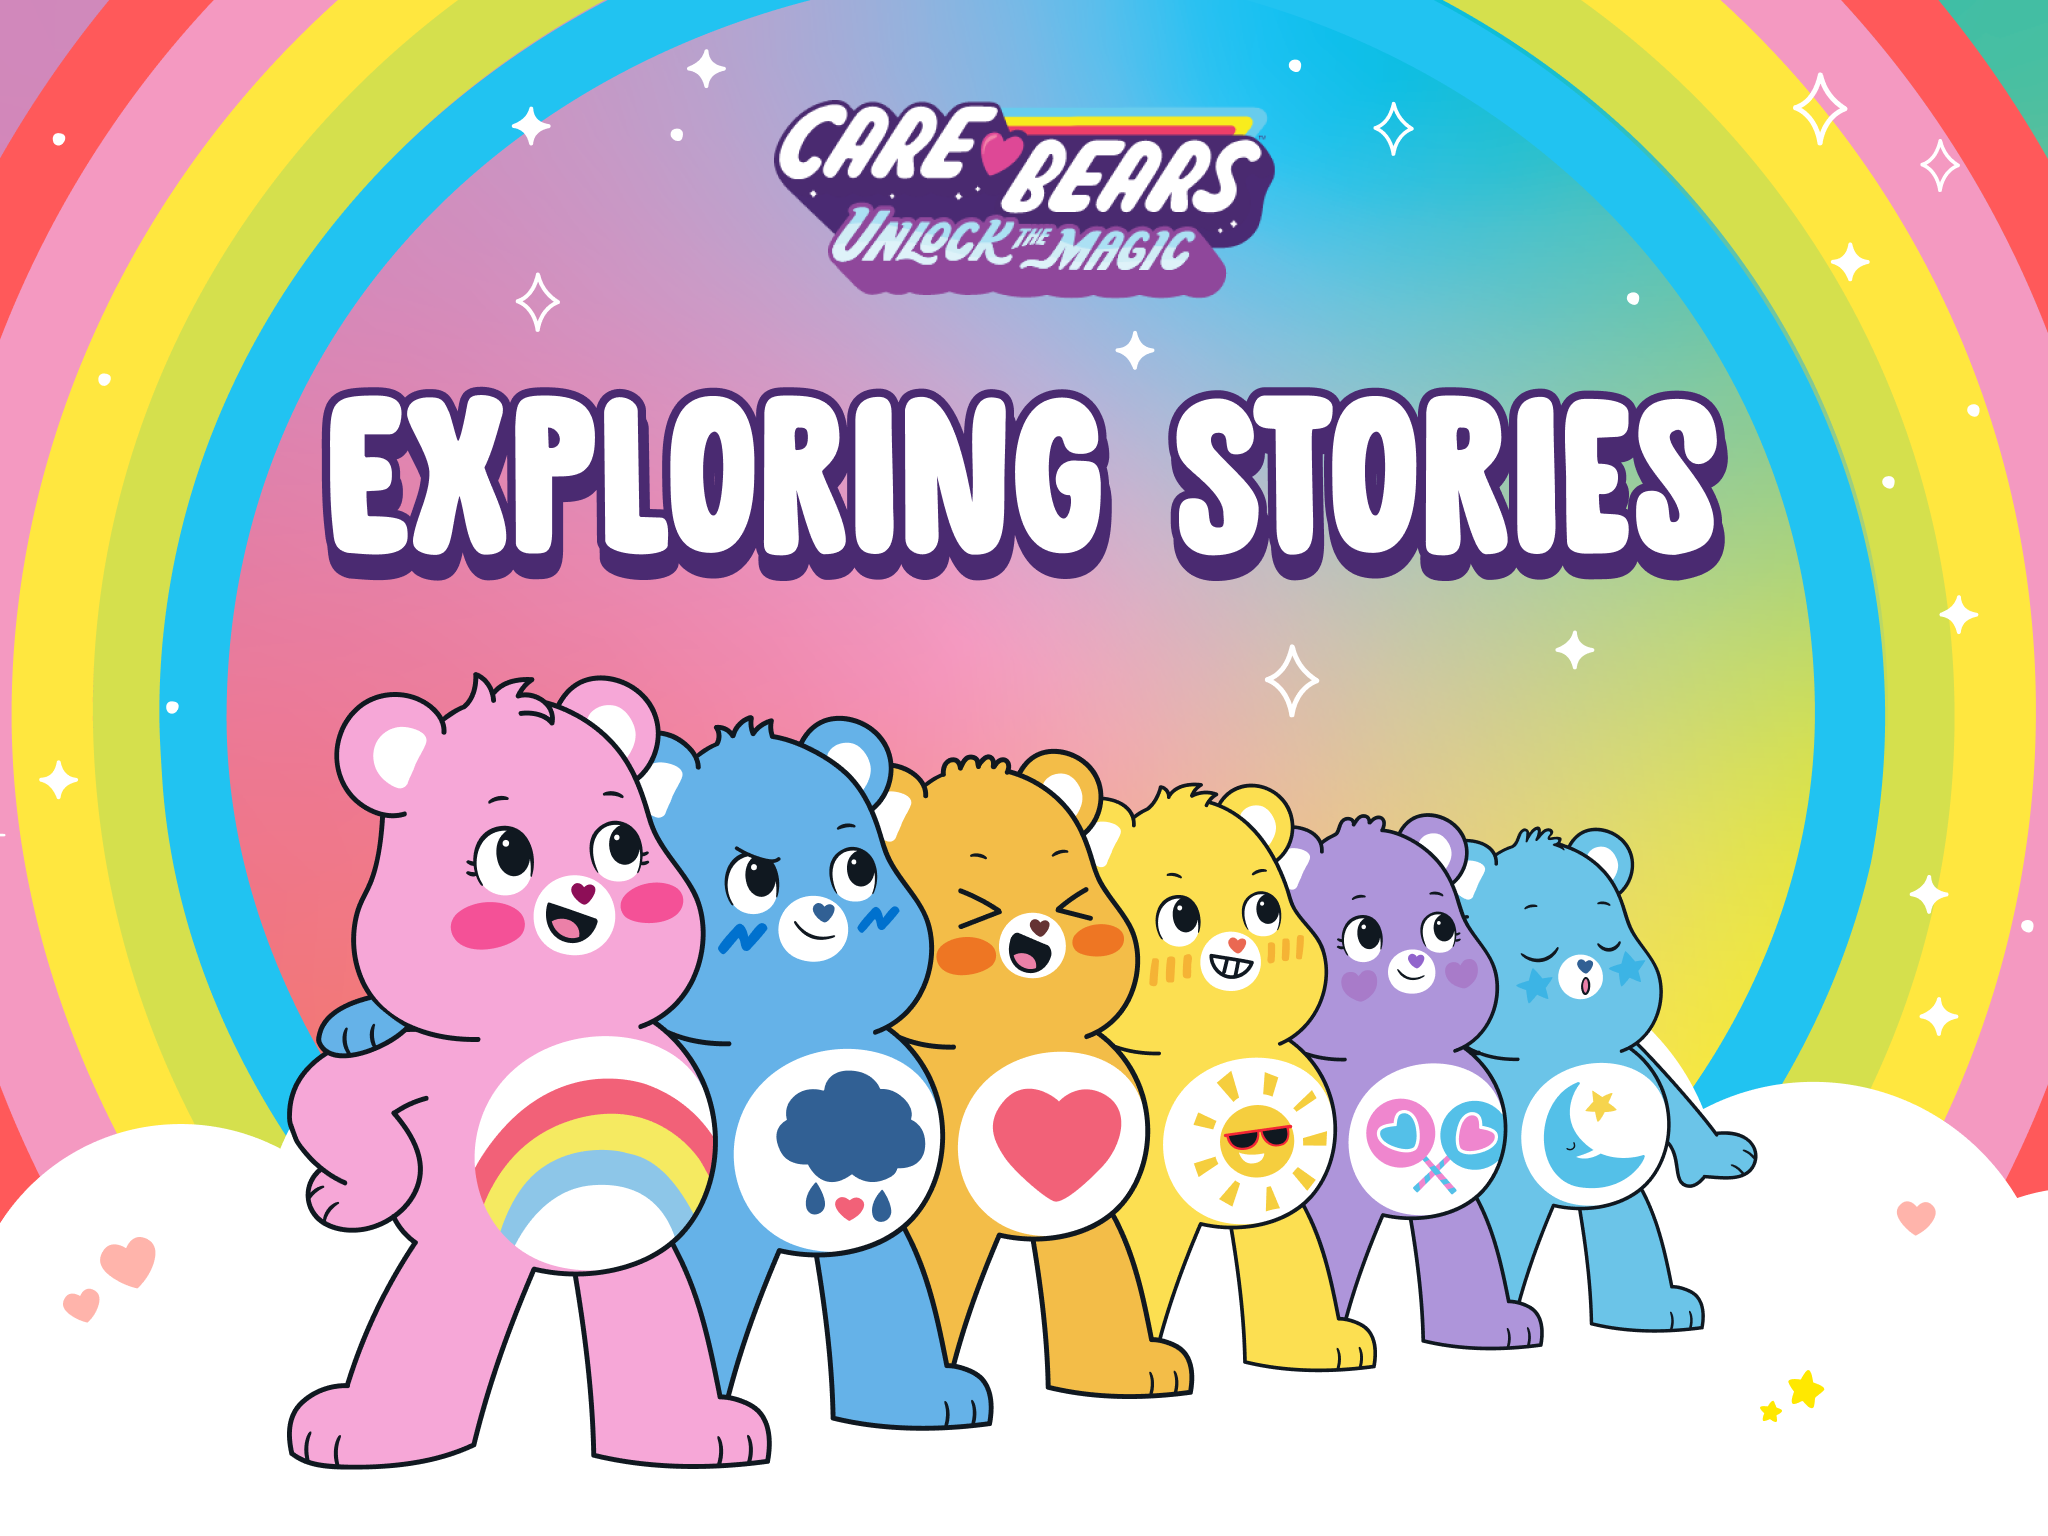 Exploring Stories with the Care Bears